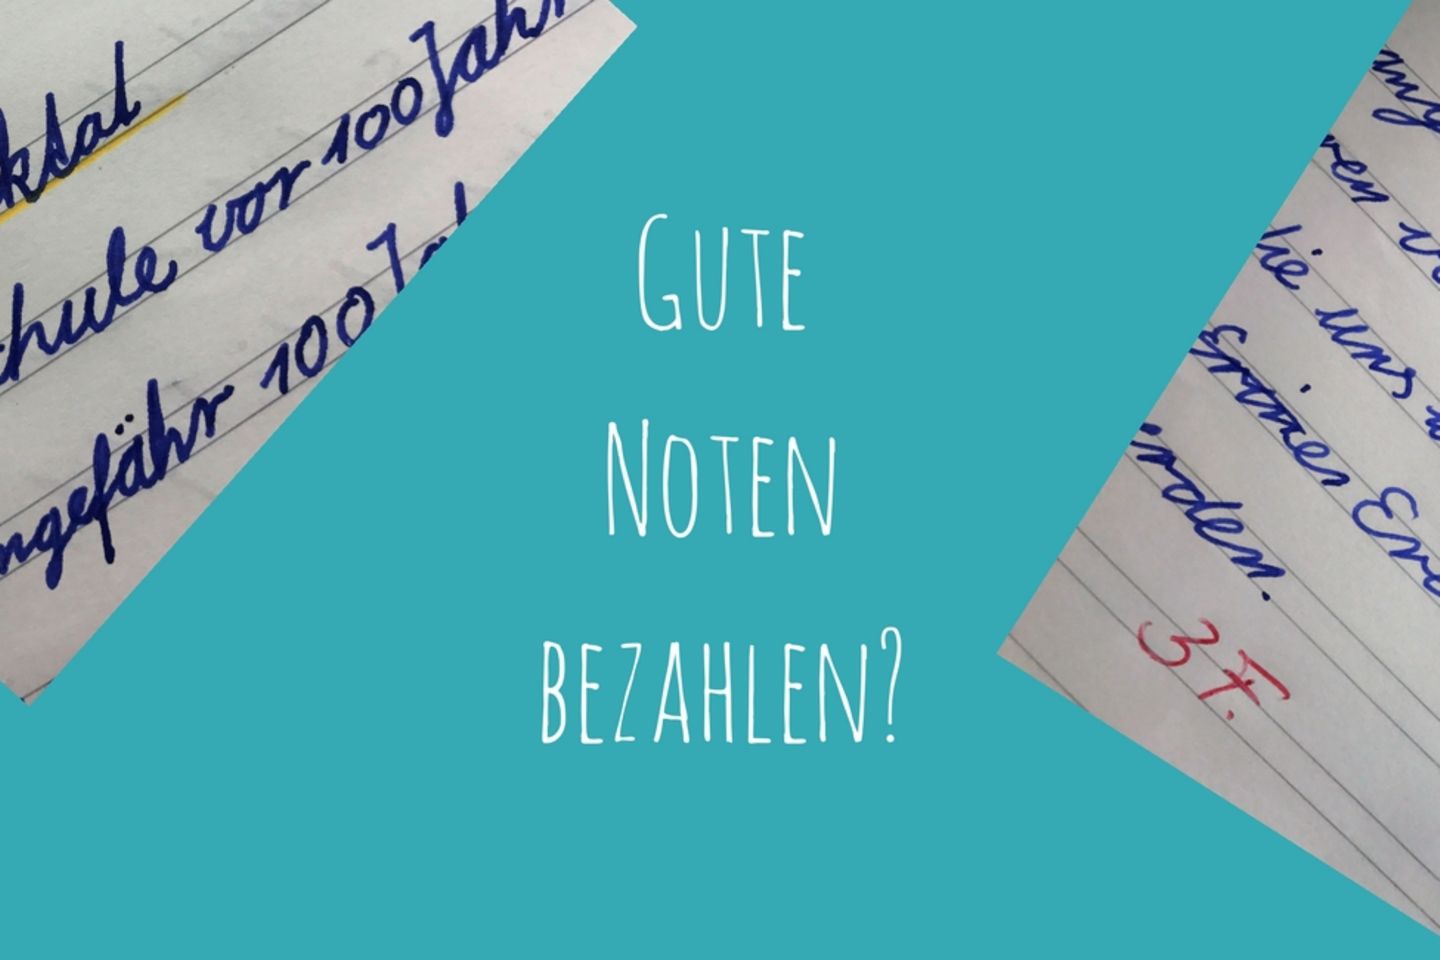 Blogs Mom's favorites and more Gute Noten